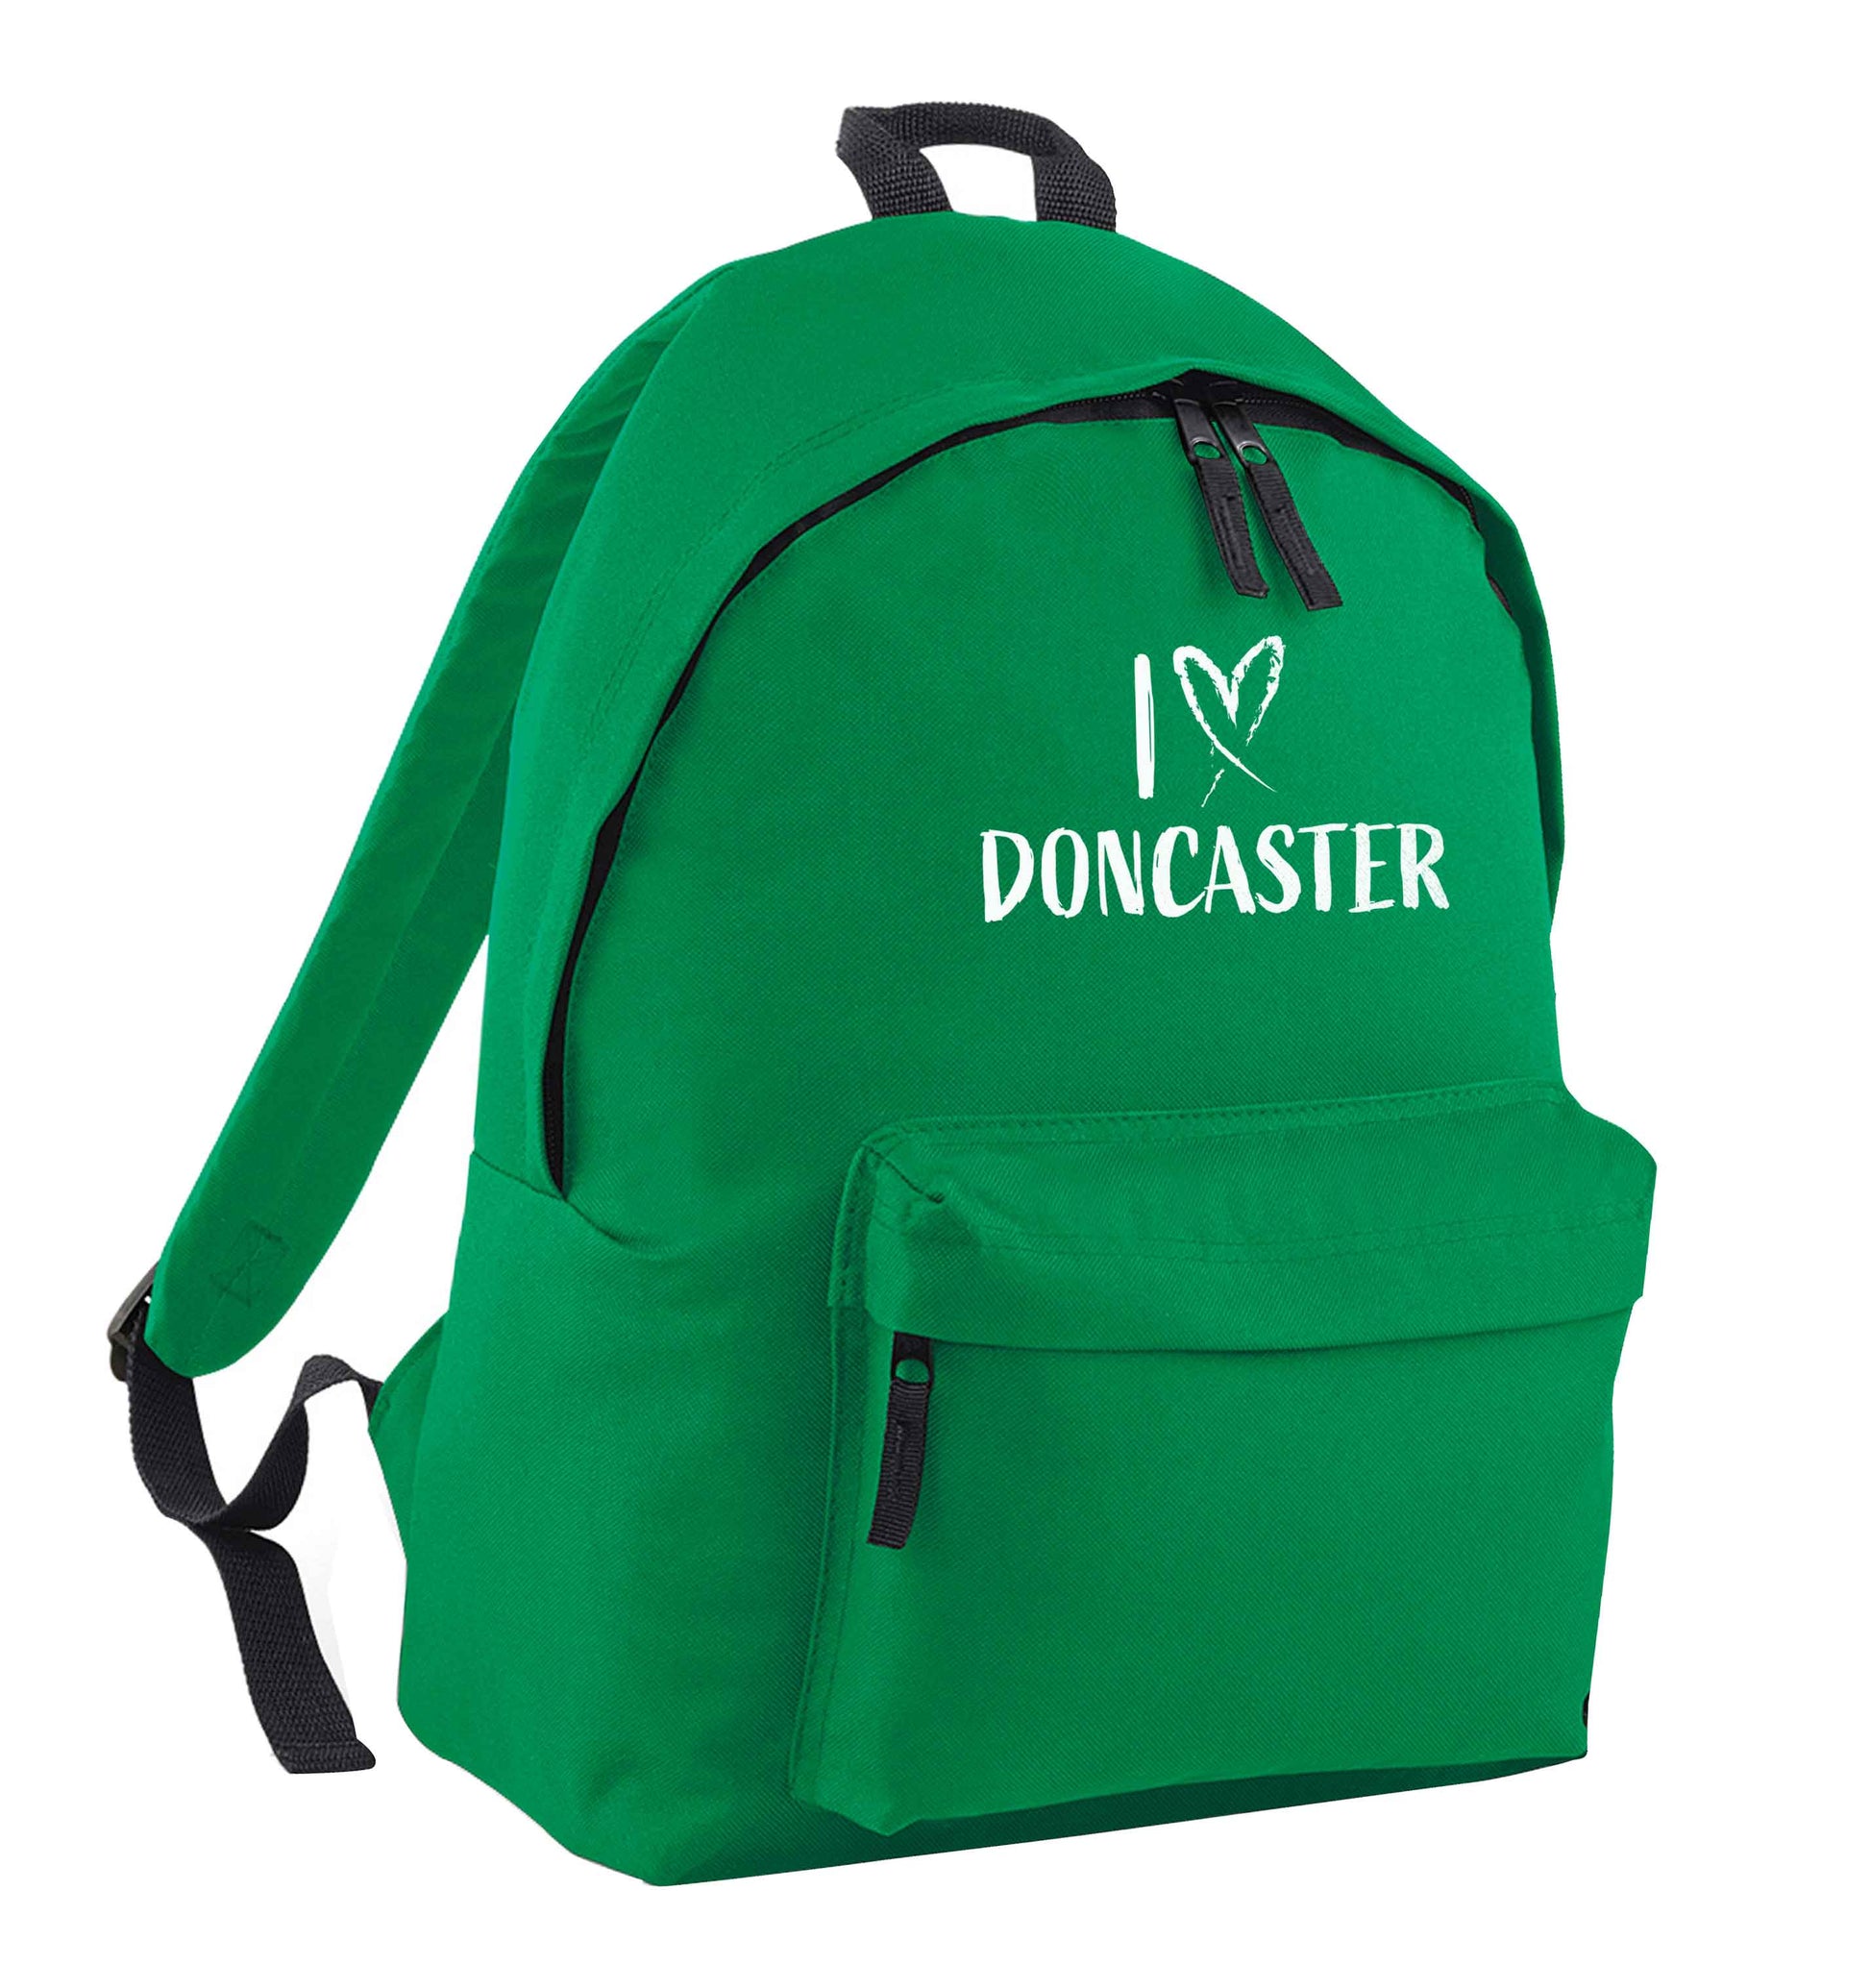 I love Doncaster green adults backpack